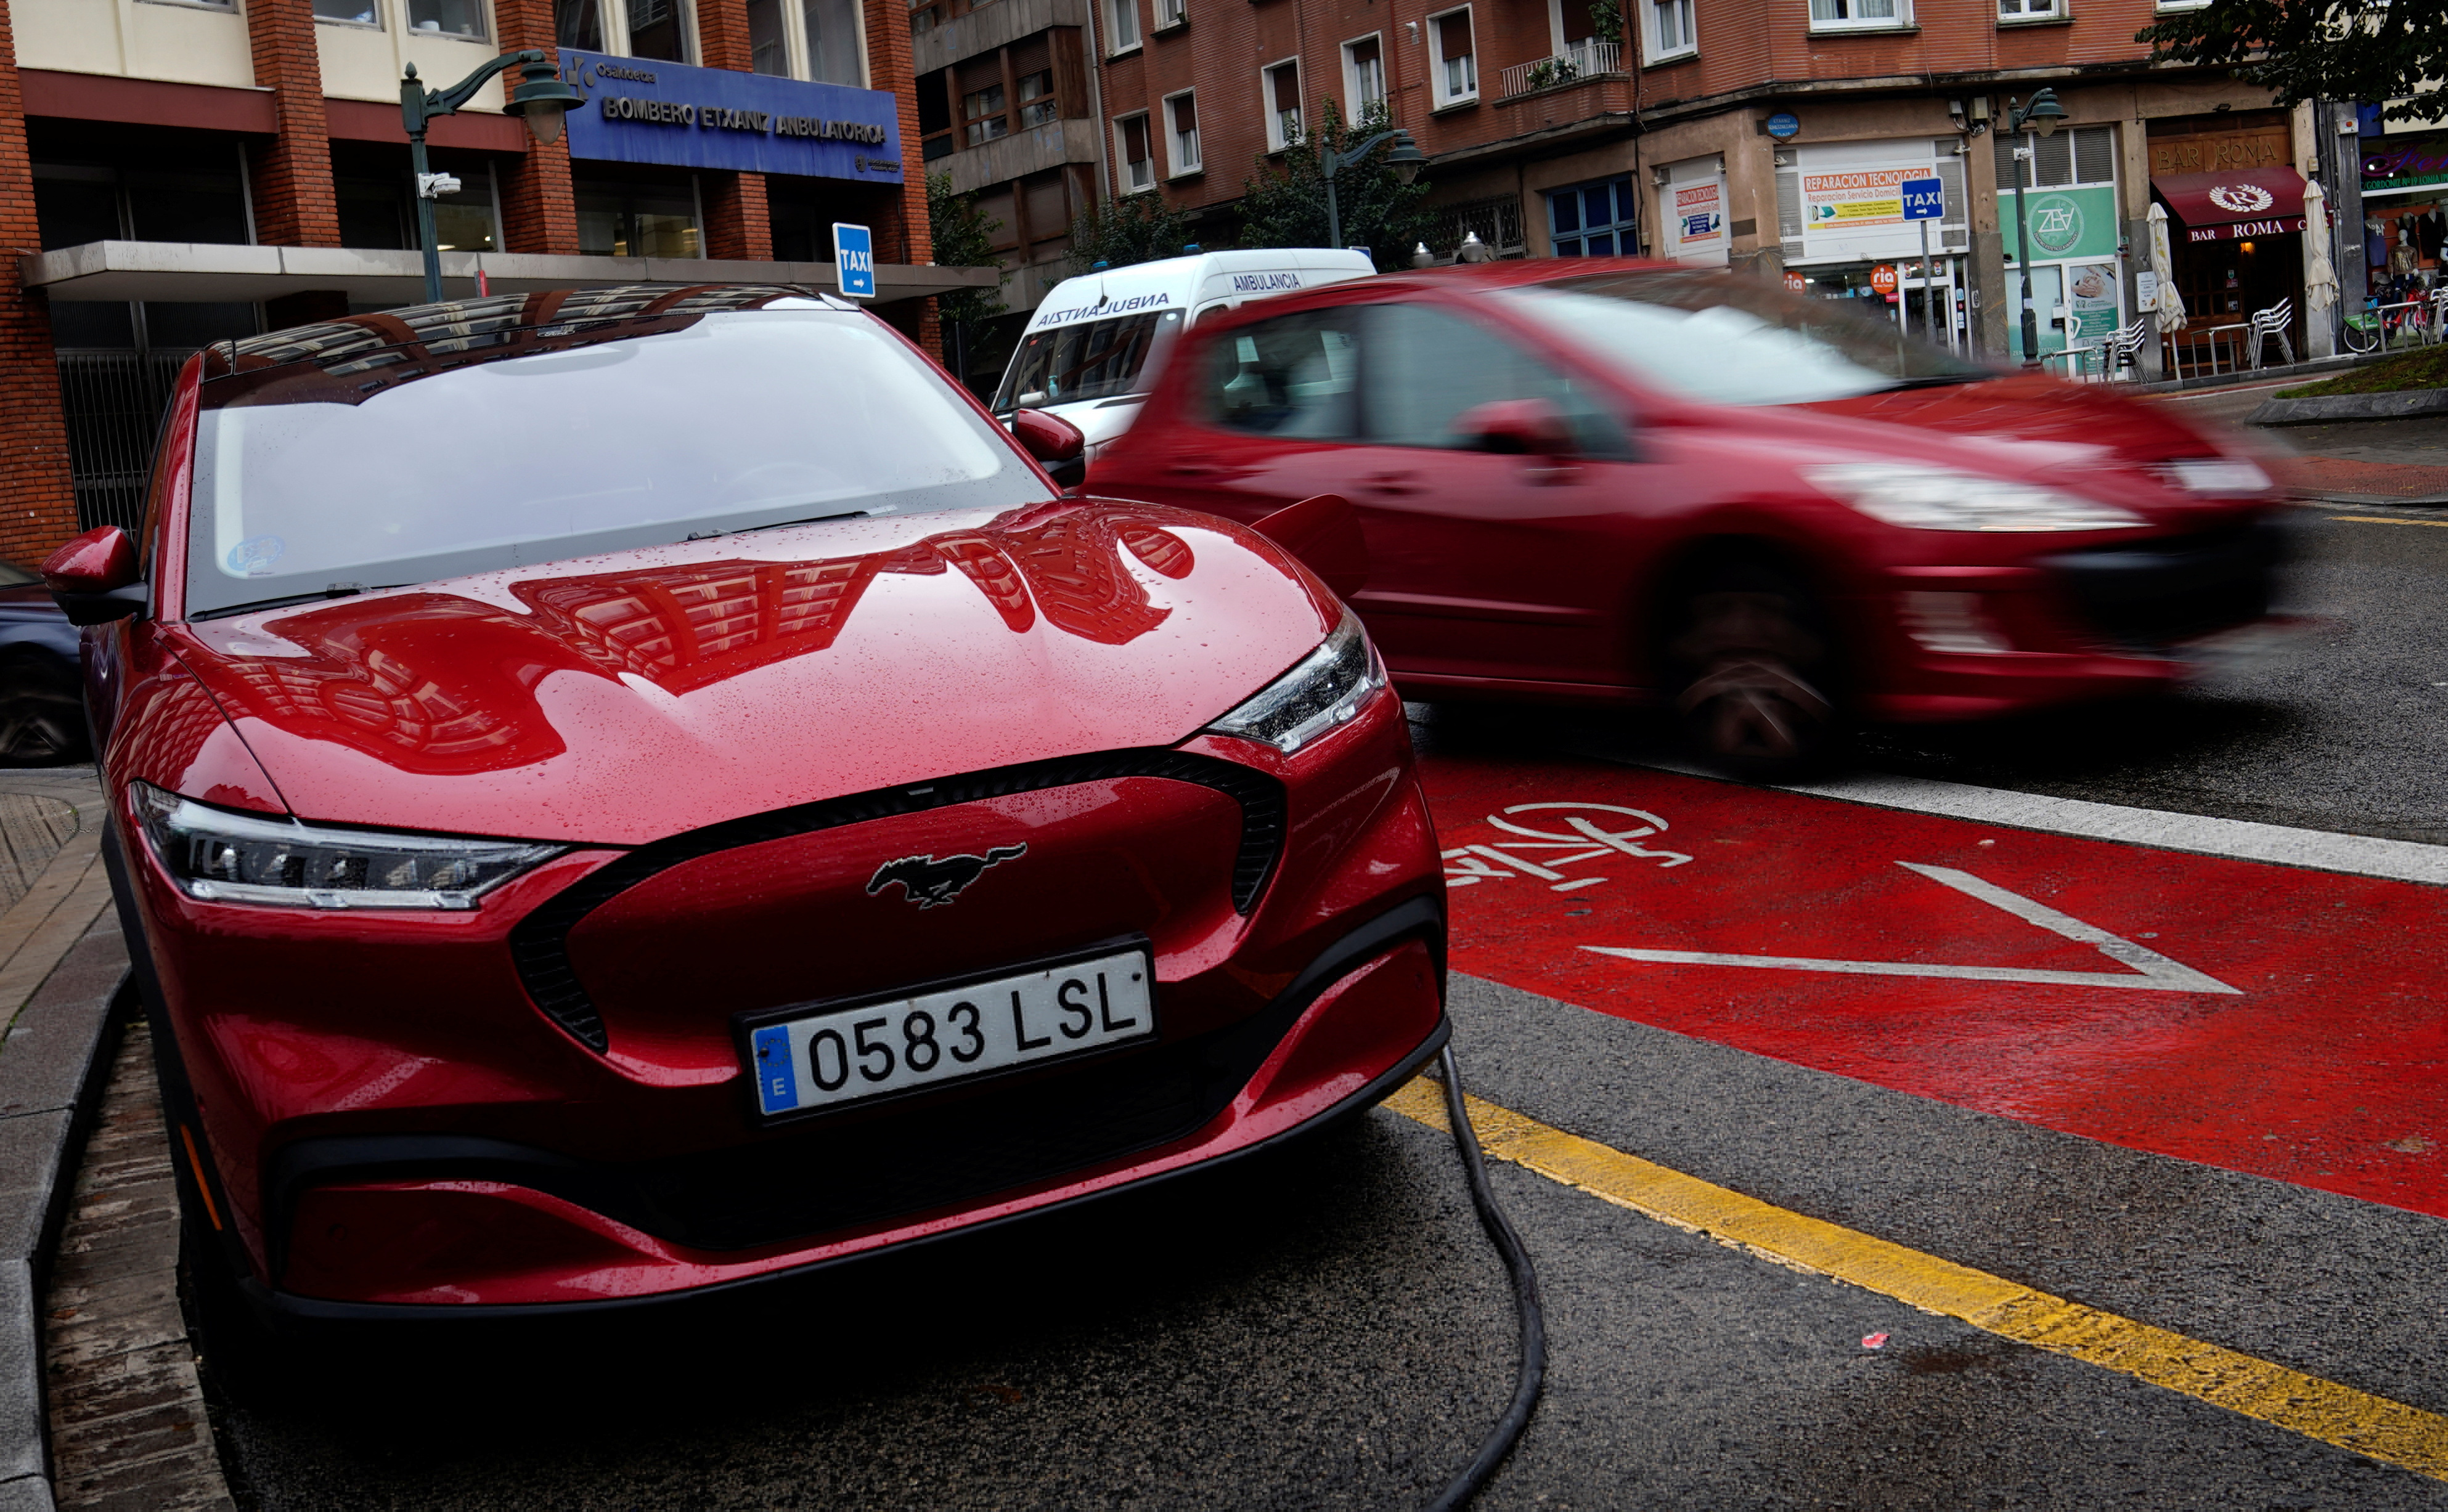 A Ford Mustang Mach-e electric vehicle is seen plugged into a charging station in Bilbao